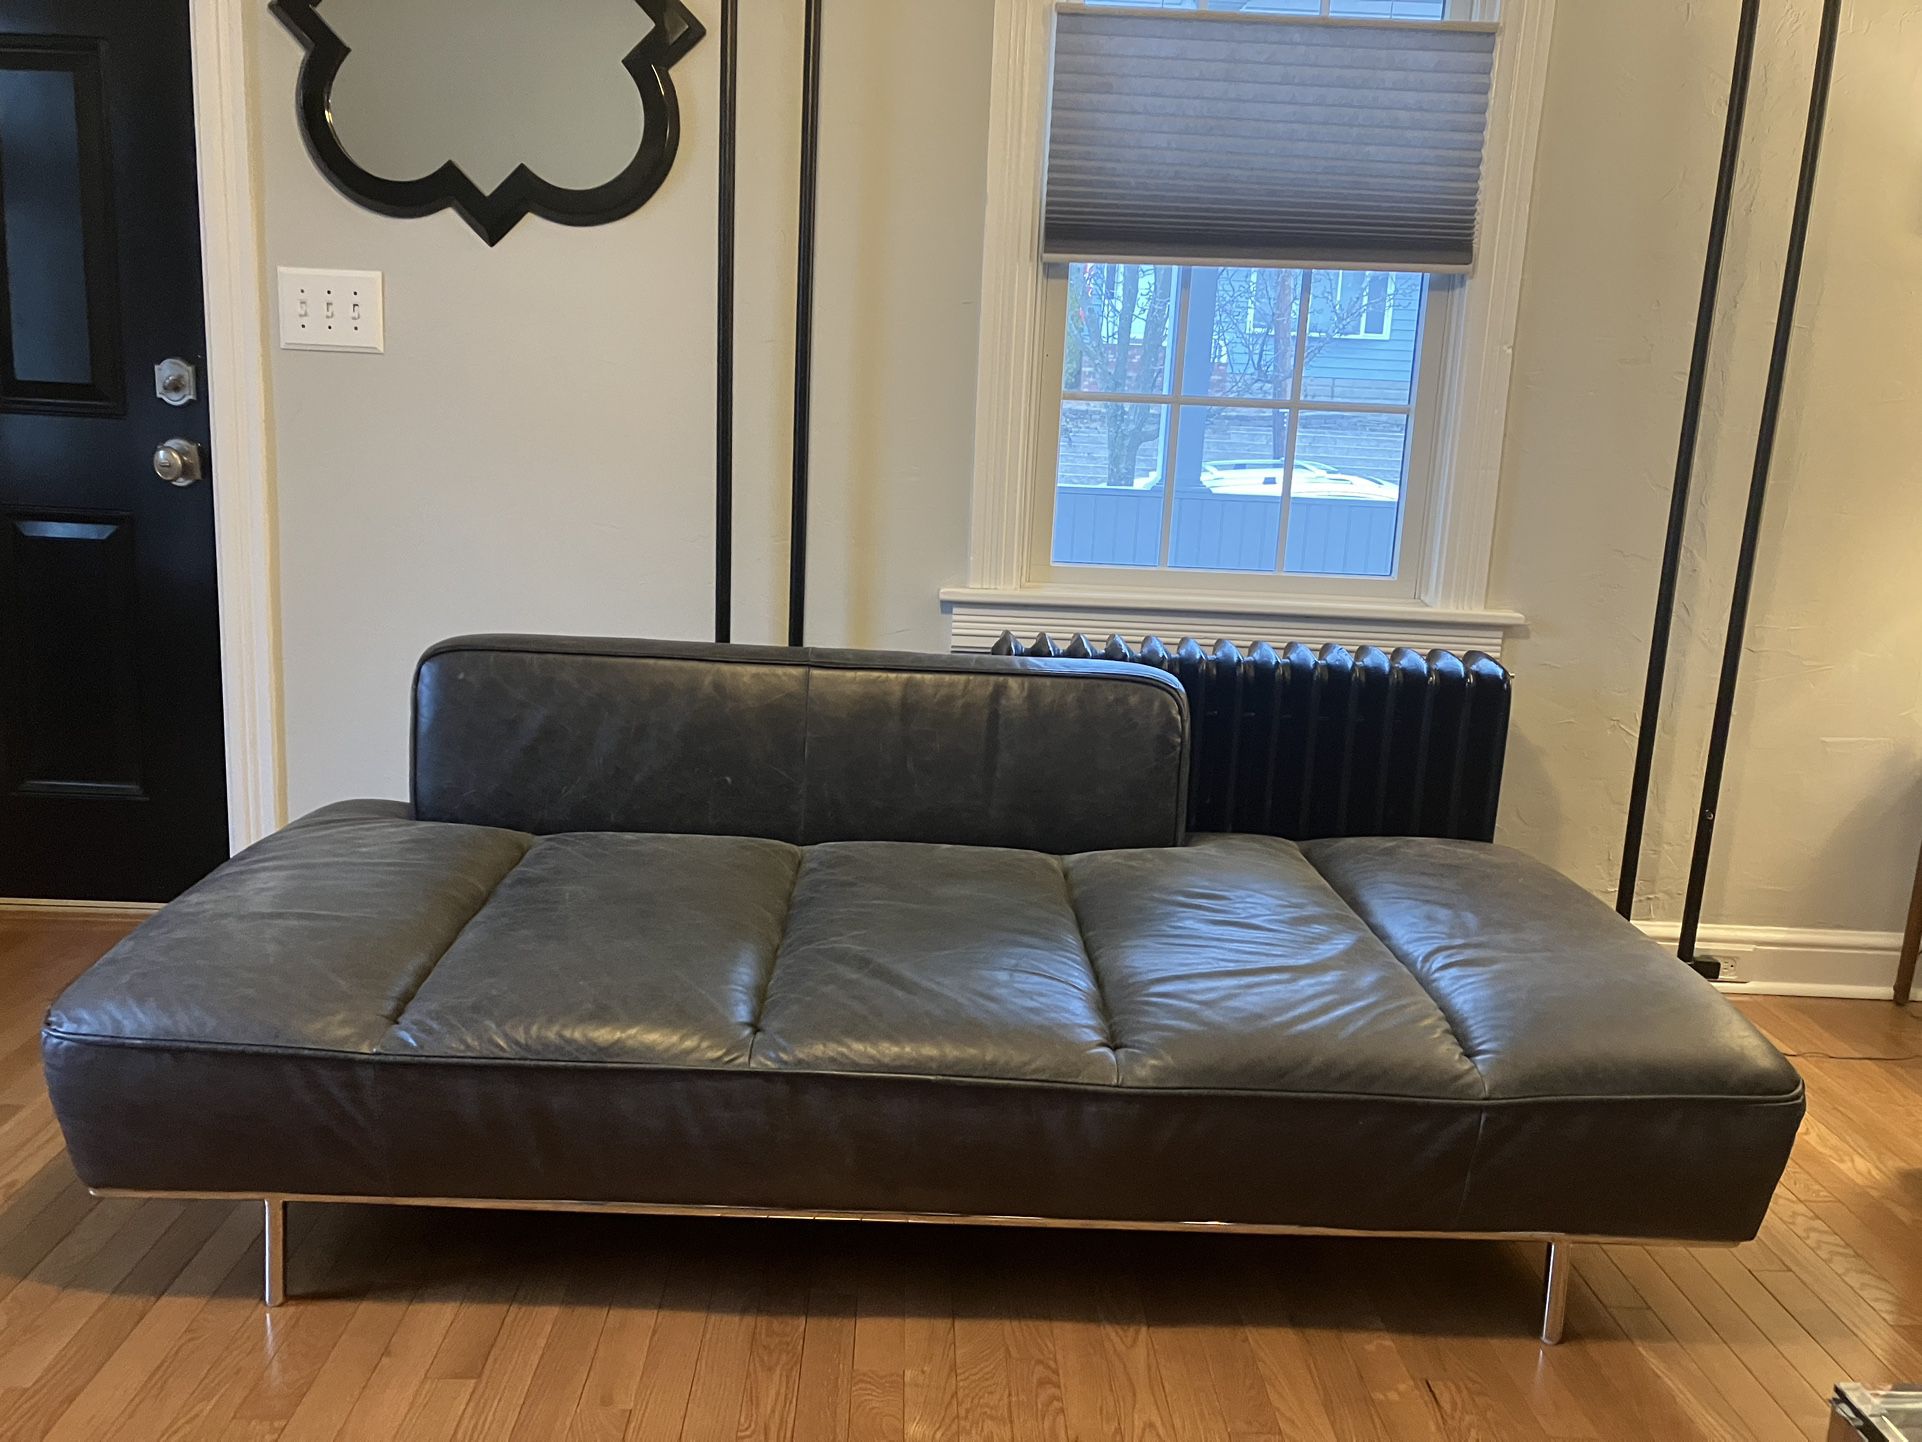 CB2 Sofa Daybed